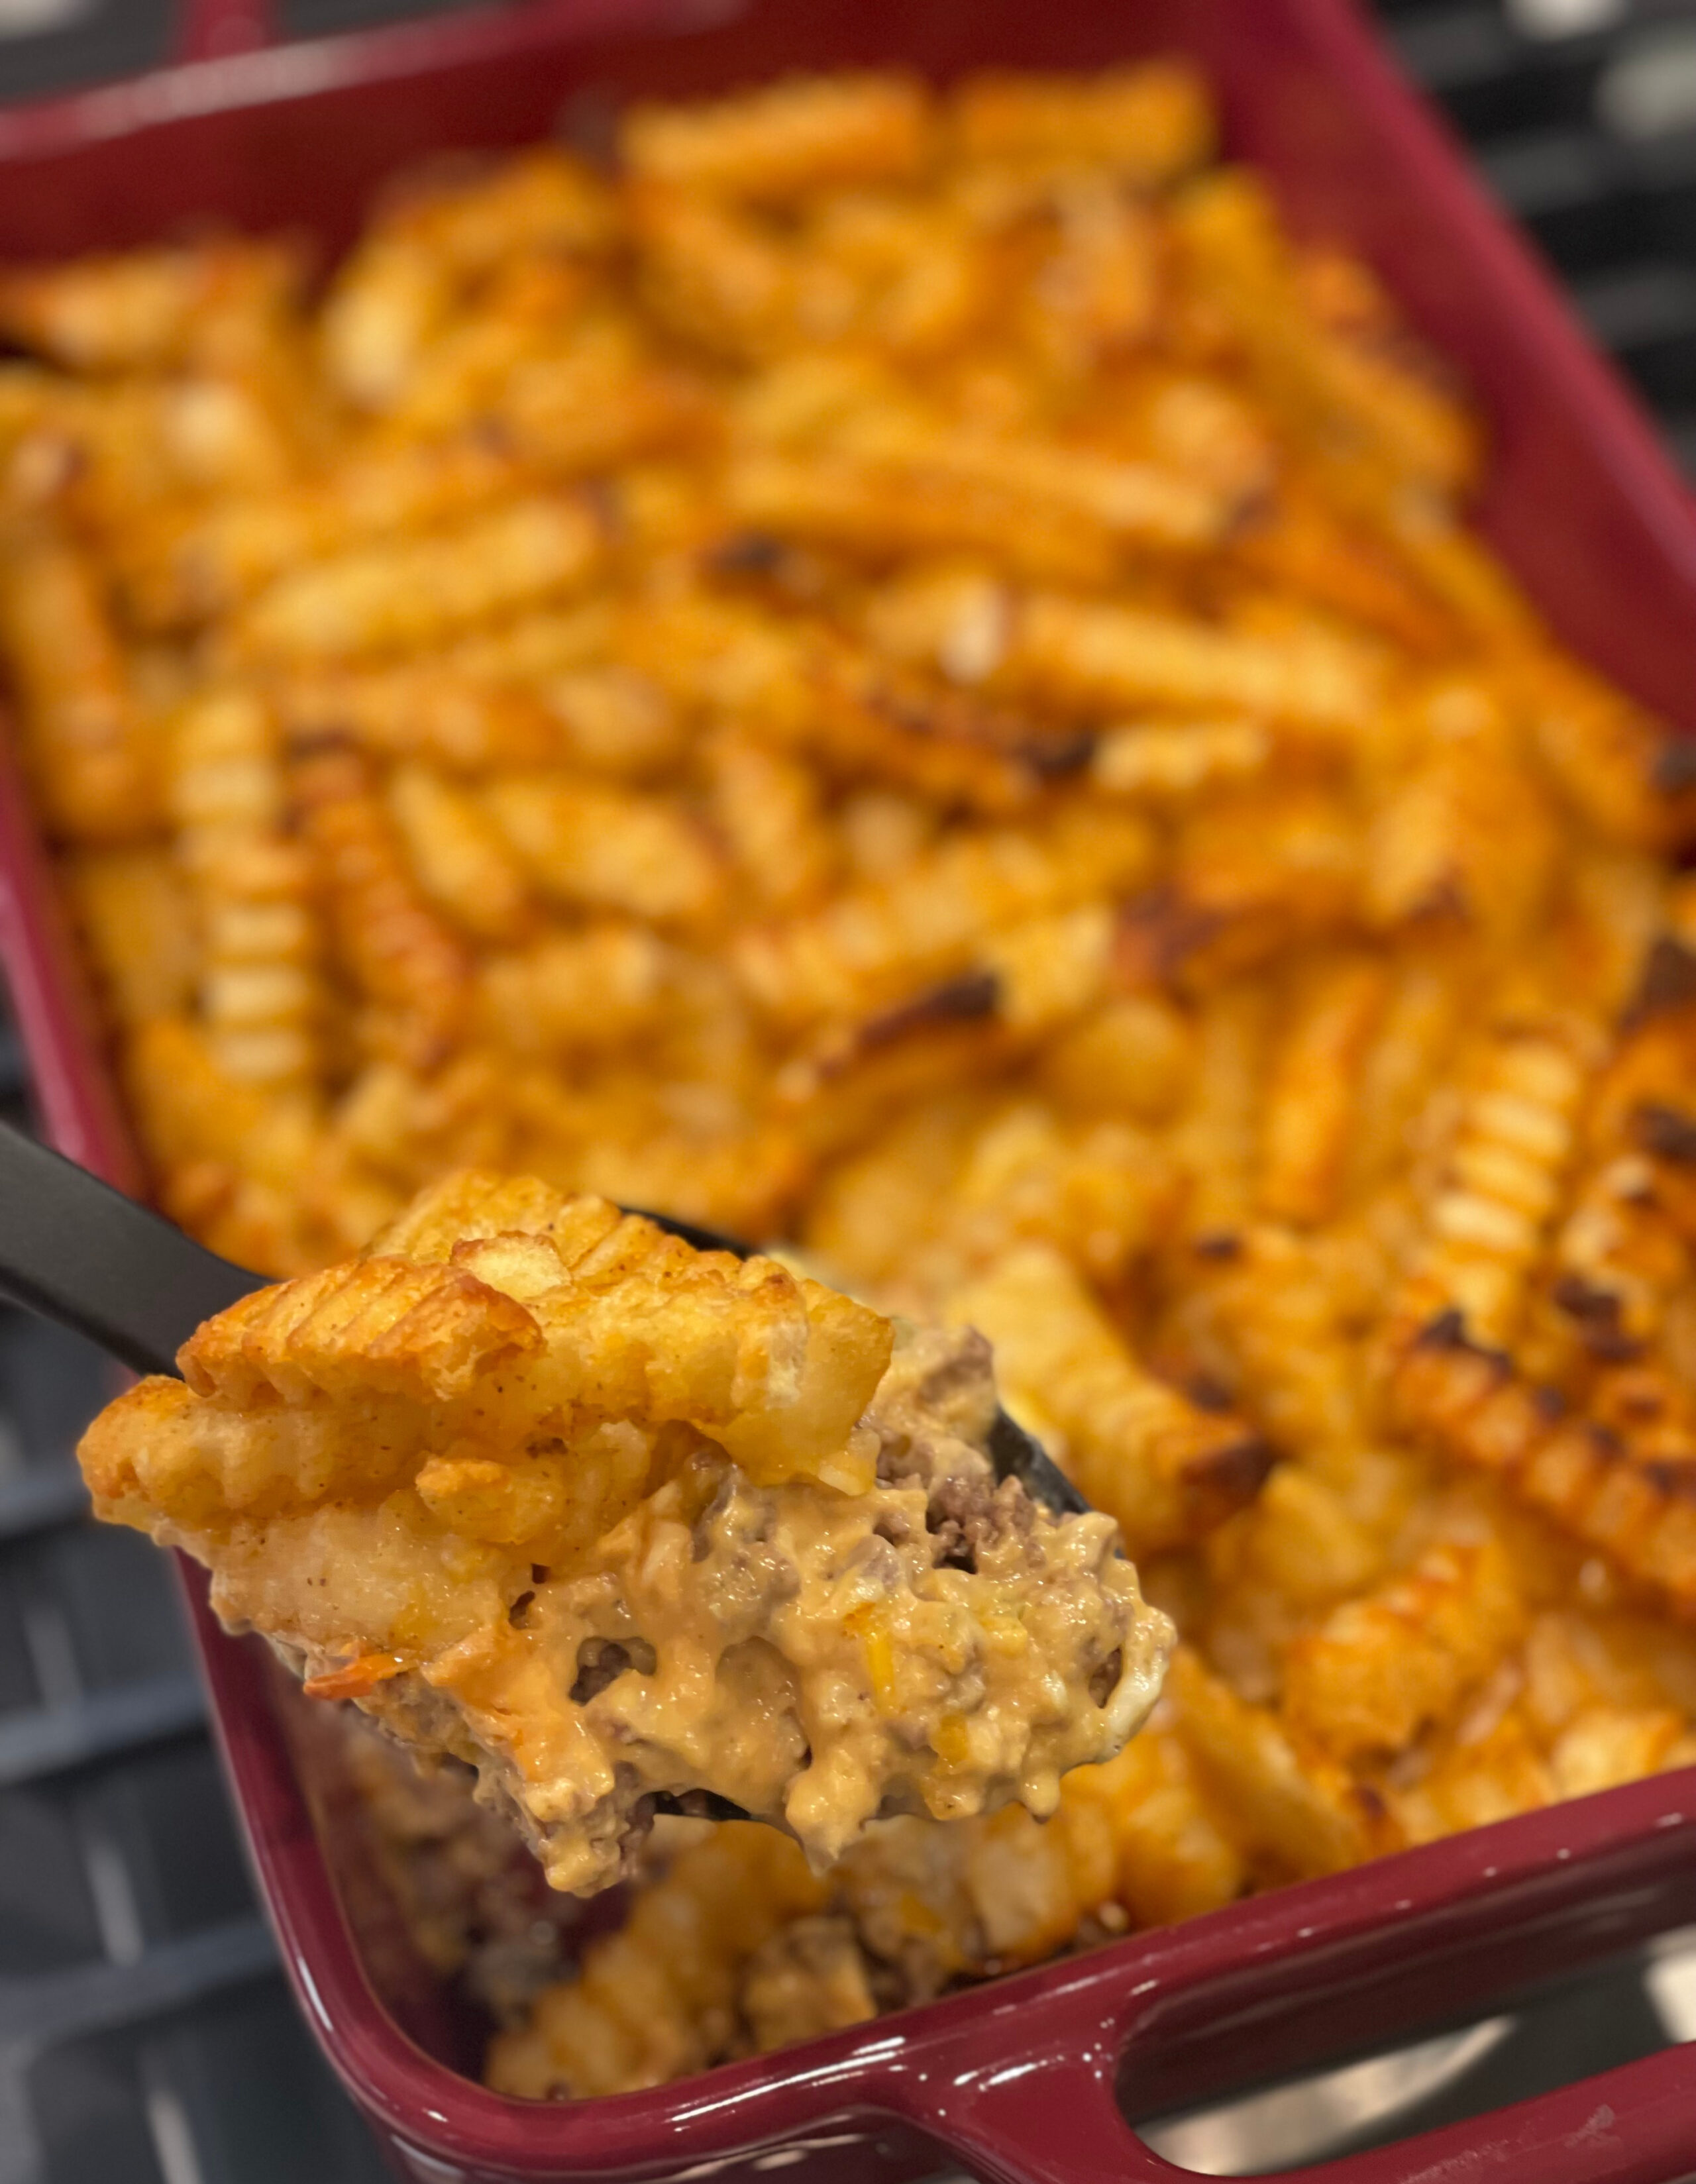 a casserole with crispy French fries and a ground beef mixture coated in ketchup and mustard.